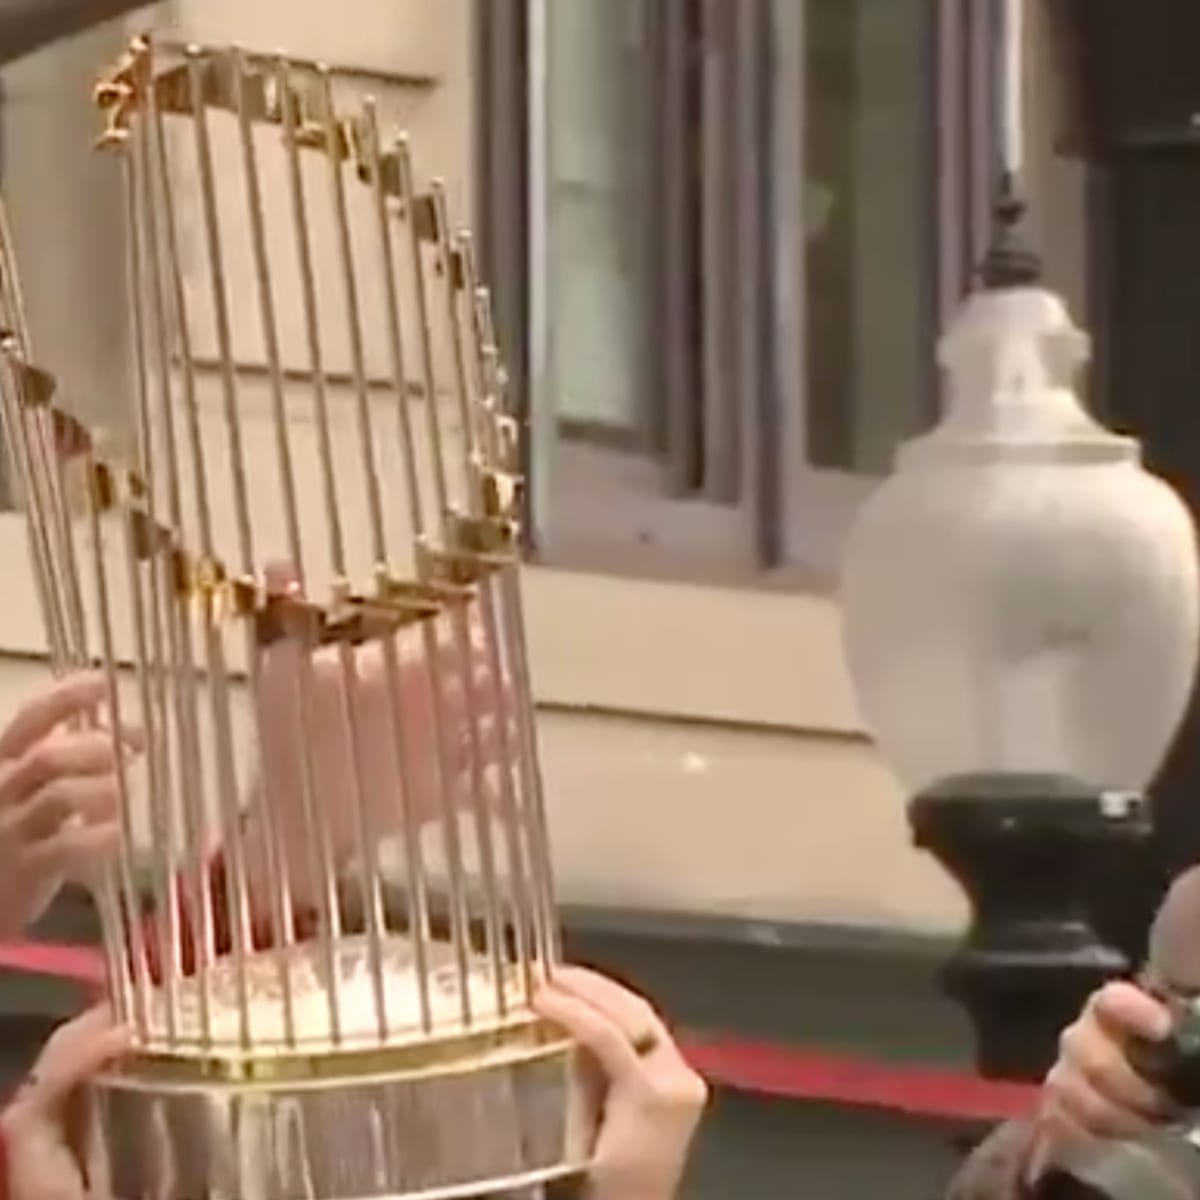 Fan dents Red Sox' World Series trophy by throwing beer can at it - Sports  Illustrated